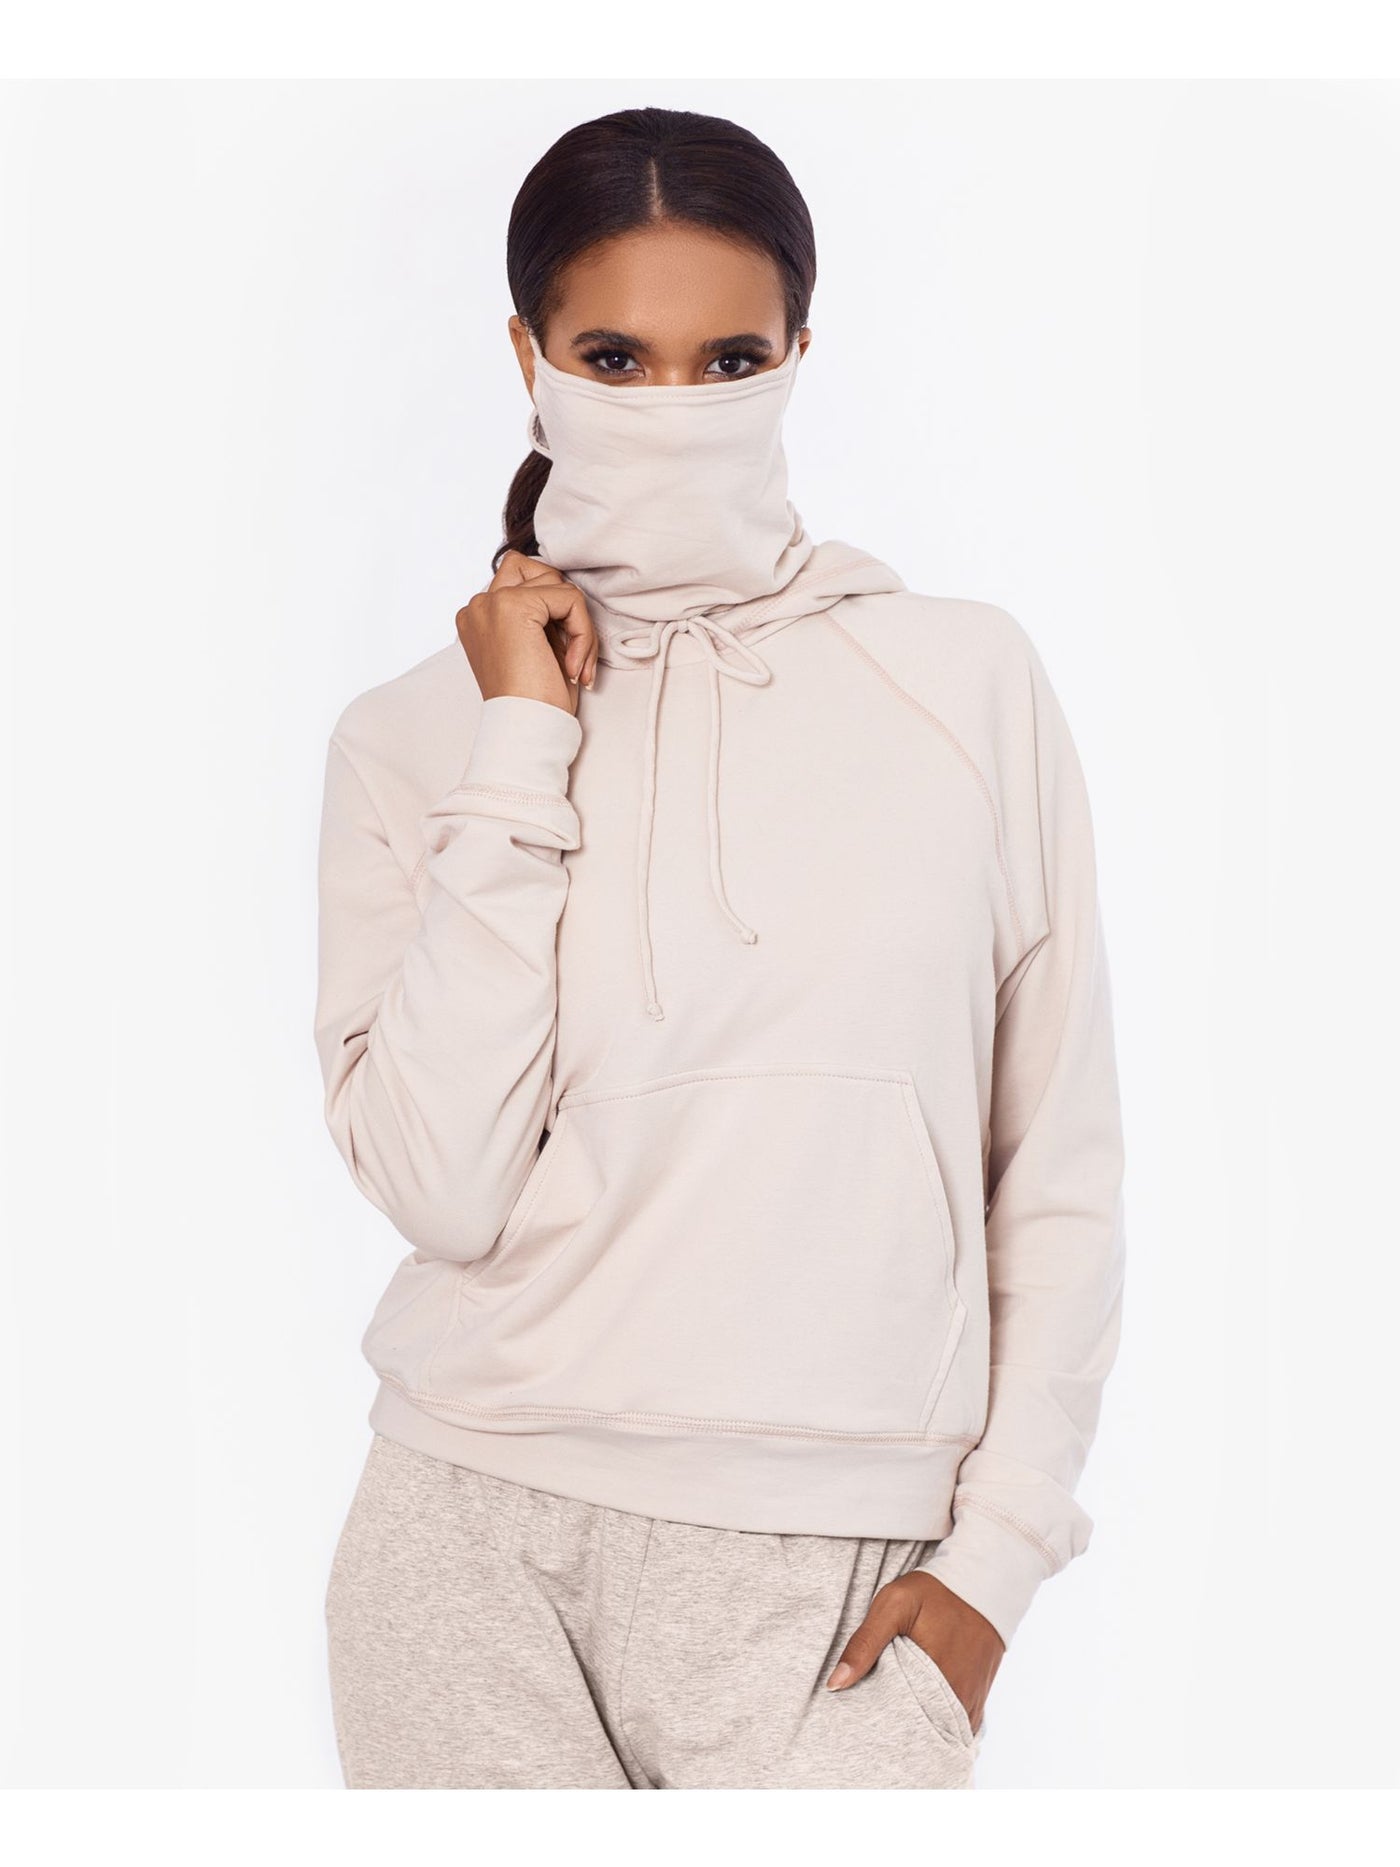 BAM BY BETSY & ADAM Womens Beige Stretch Tie Built-in Mask, Relaxed Fit Long Sleeve Hoodie Top L